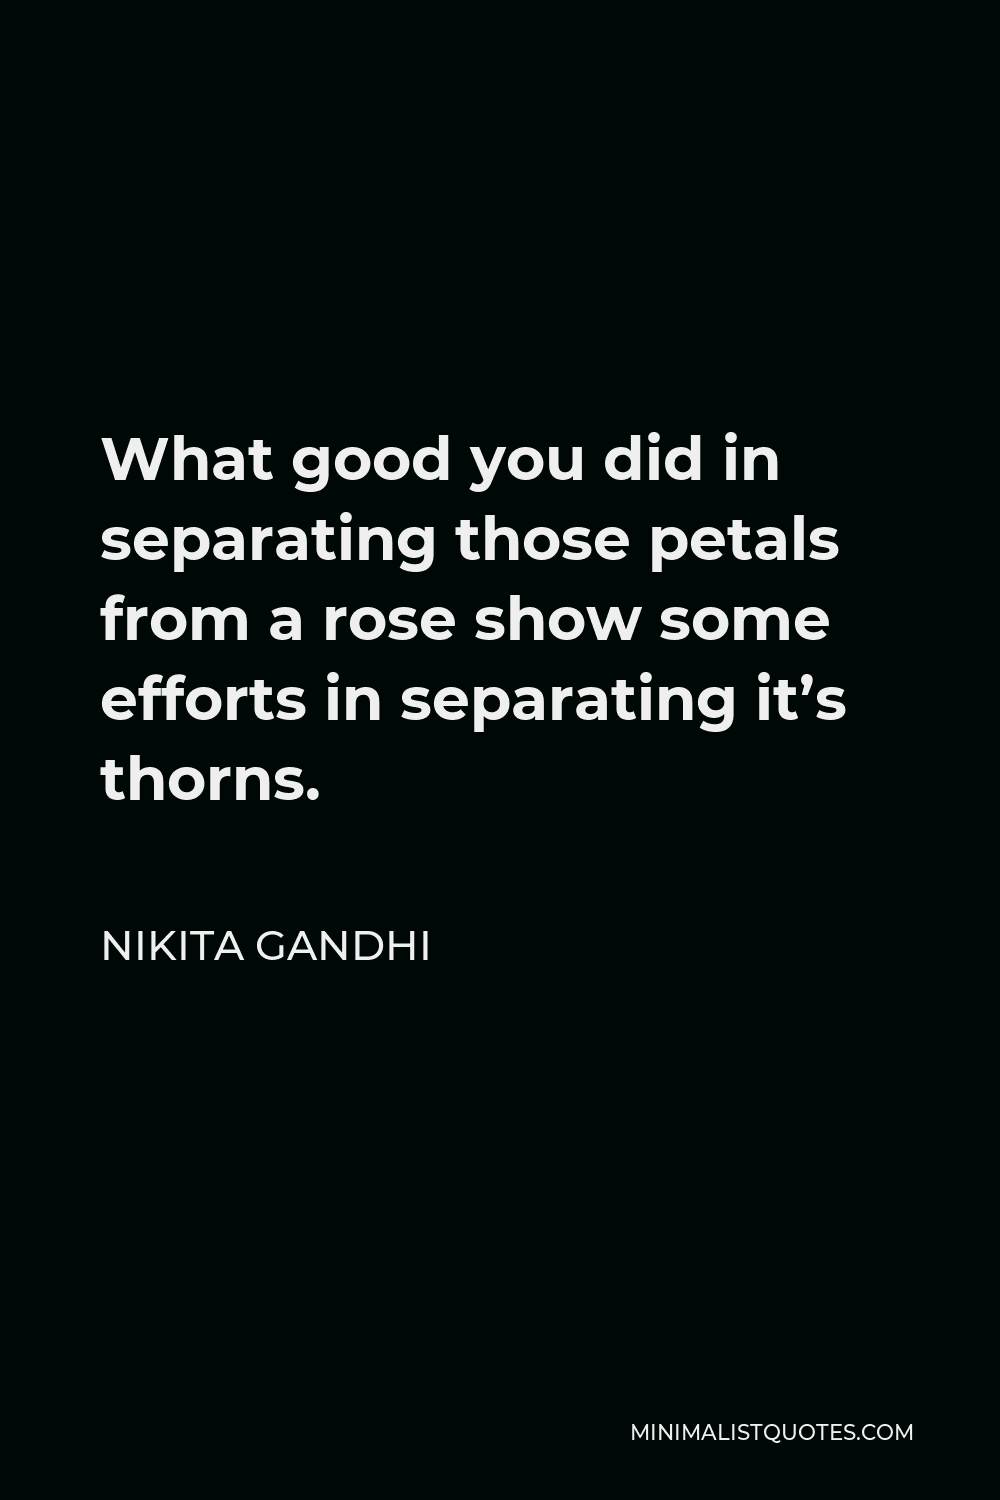 Nikita Gandhi Quote - What good you did in separating those petals from a rose show some efforts in separating it’s thorns.